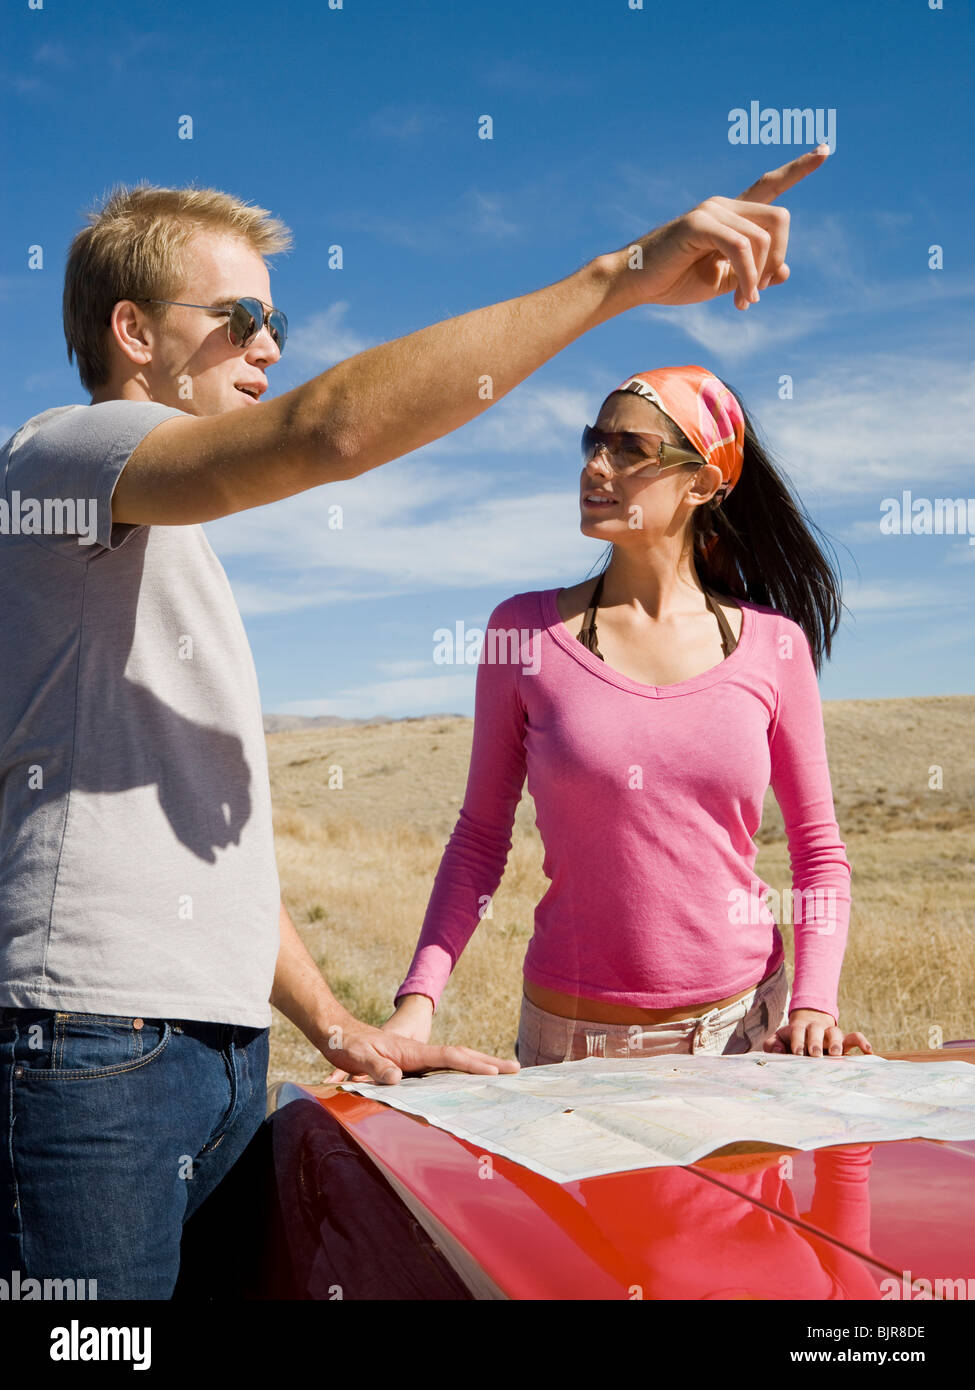 man and woman next to a red convertible Stock Photo